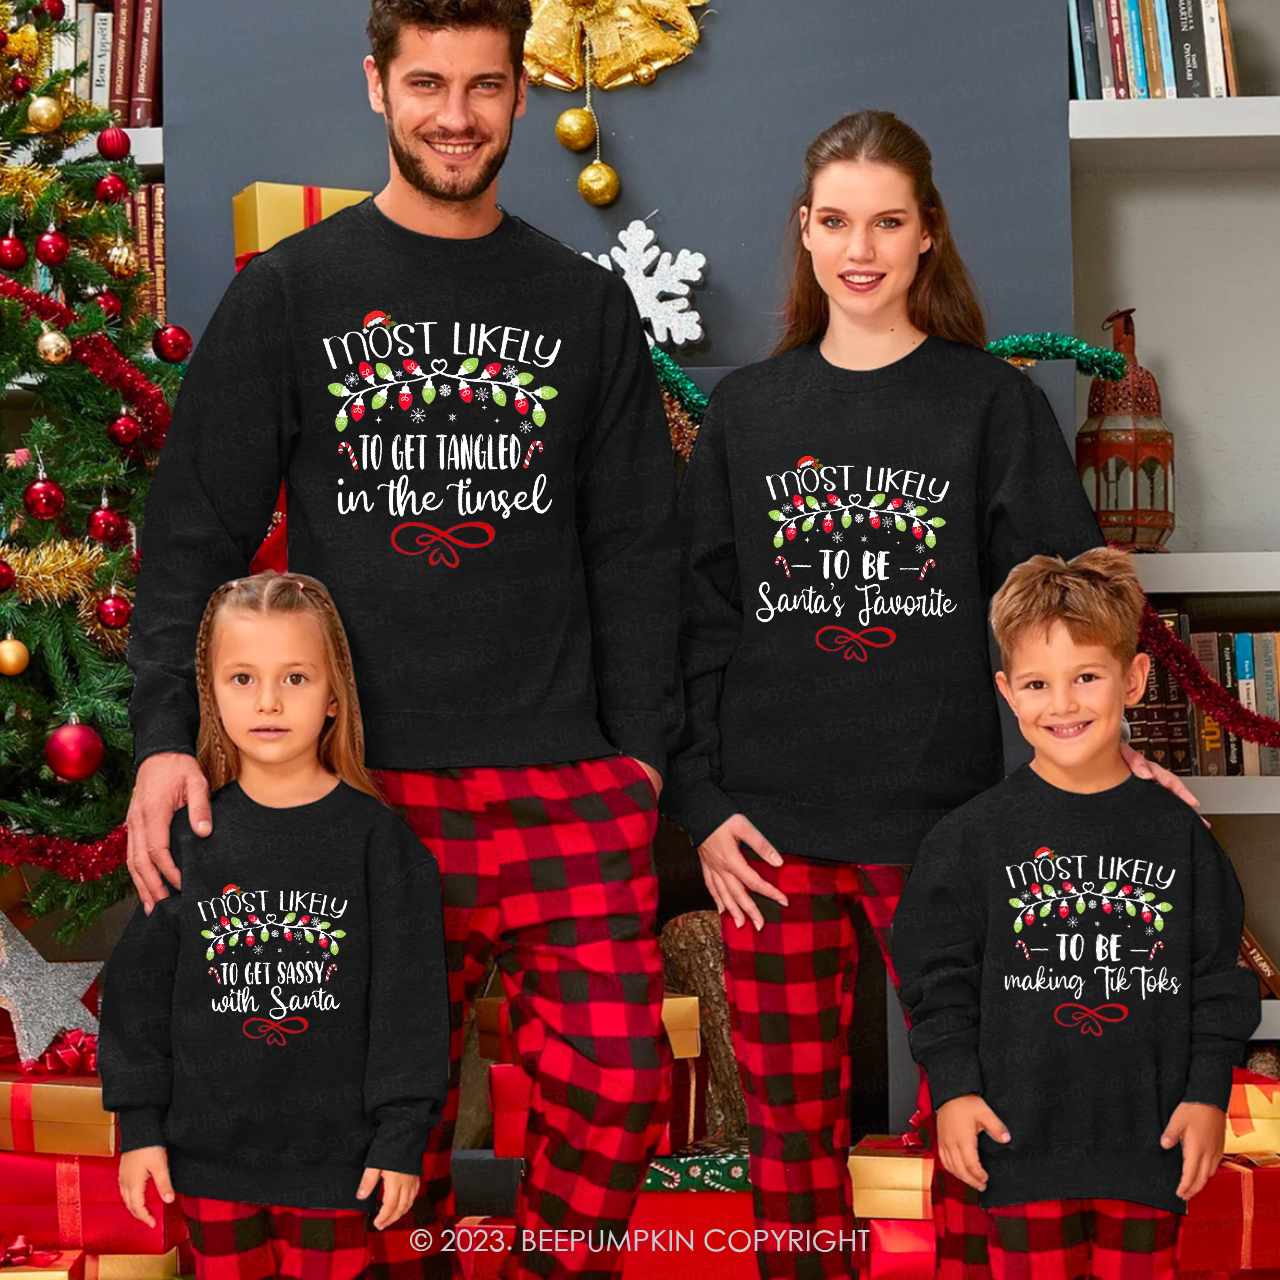 64 Quotes Most Likely And Custom Christmas Family Sweatshirts